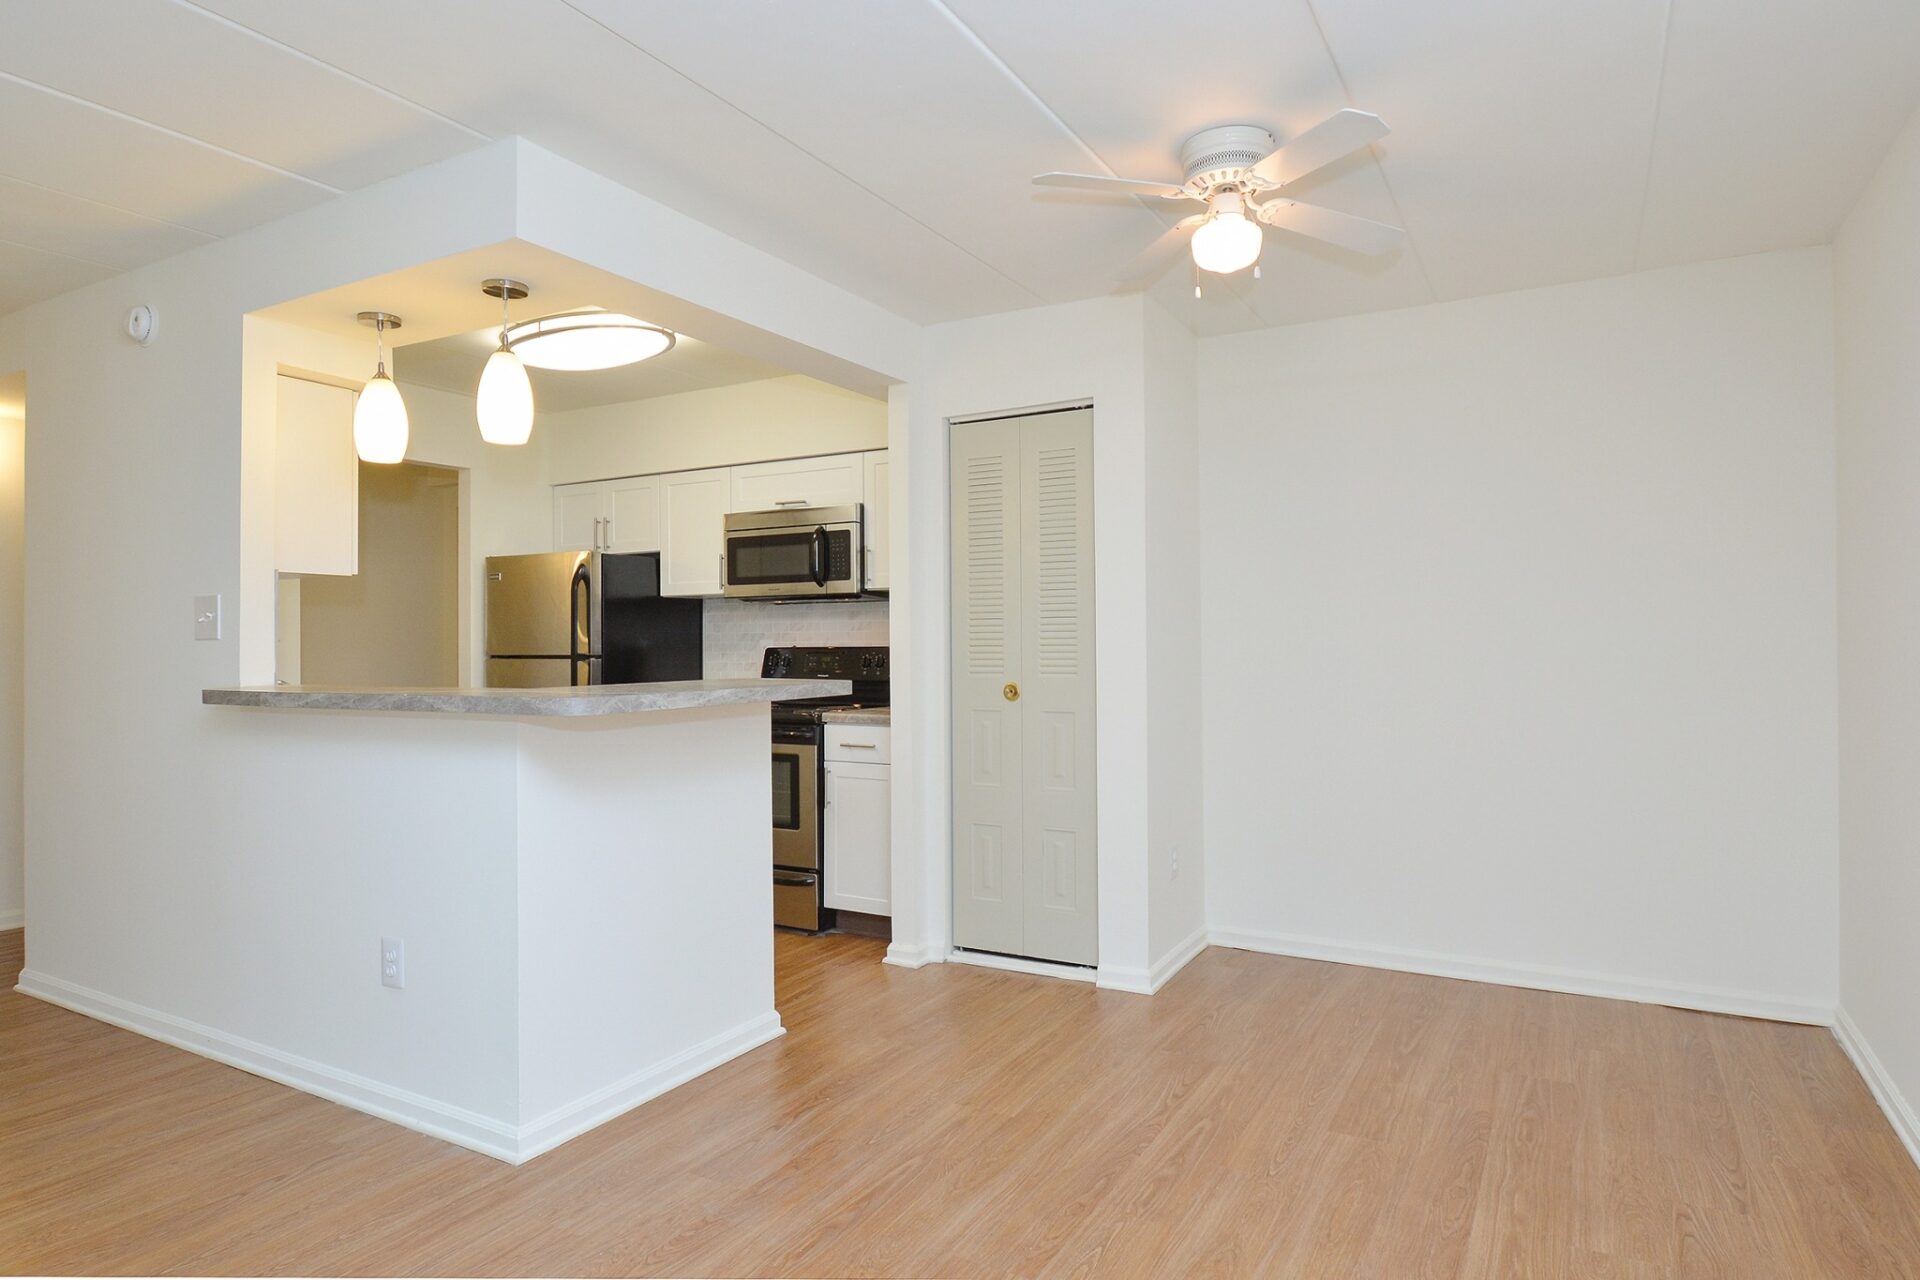 Kitchen and dining area with wood floors at The Lafayette at Valley Forge apartments